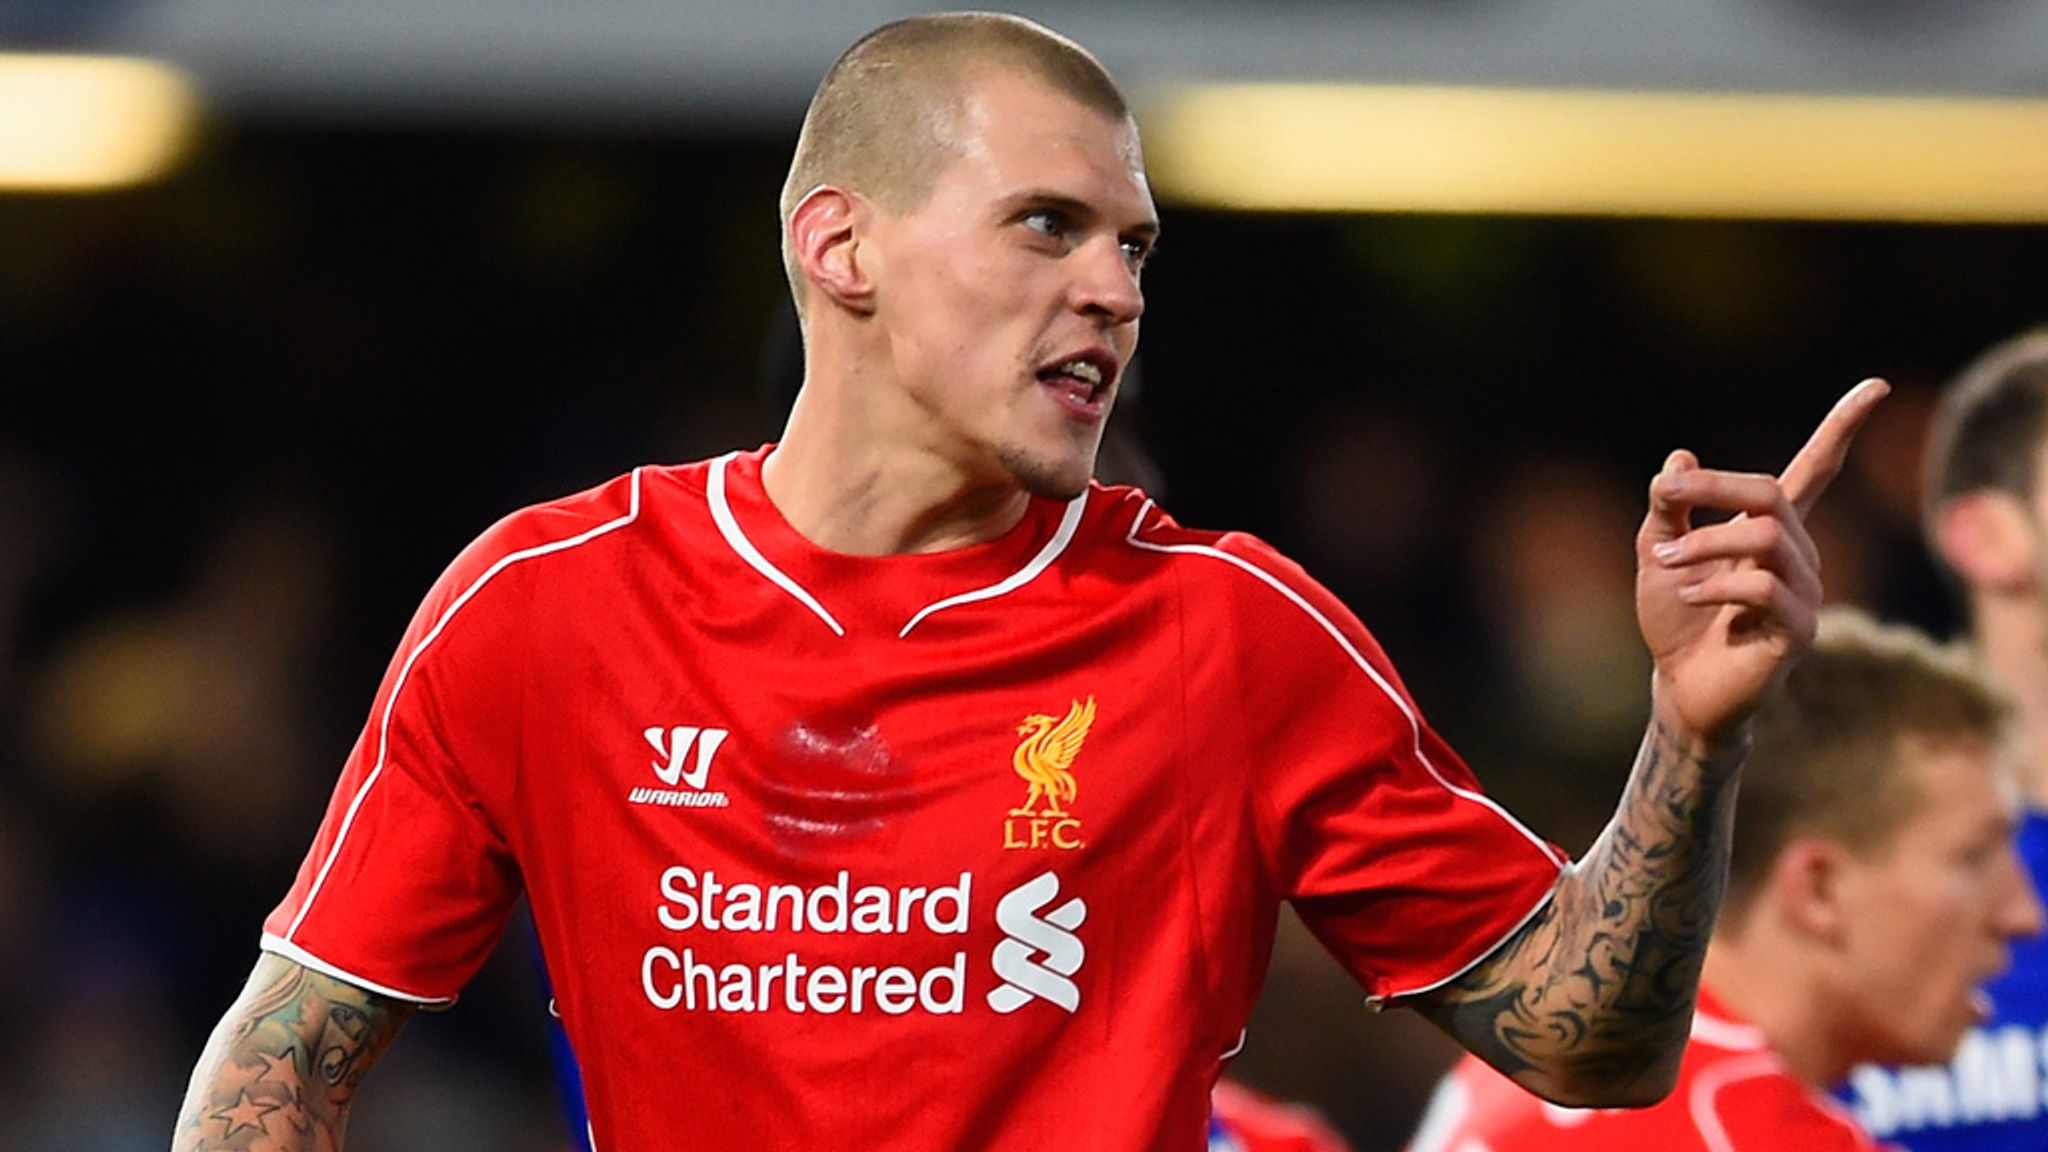 Martin Skrtel signs new Liverpool contract | Football News | Sky Sports